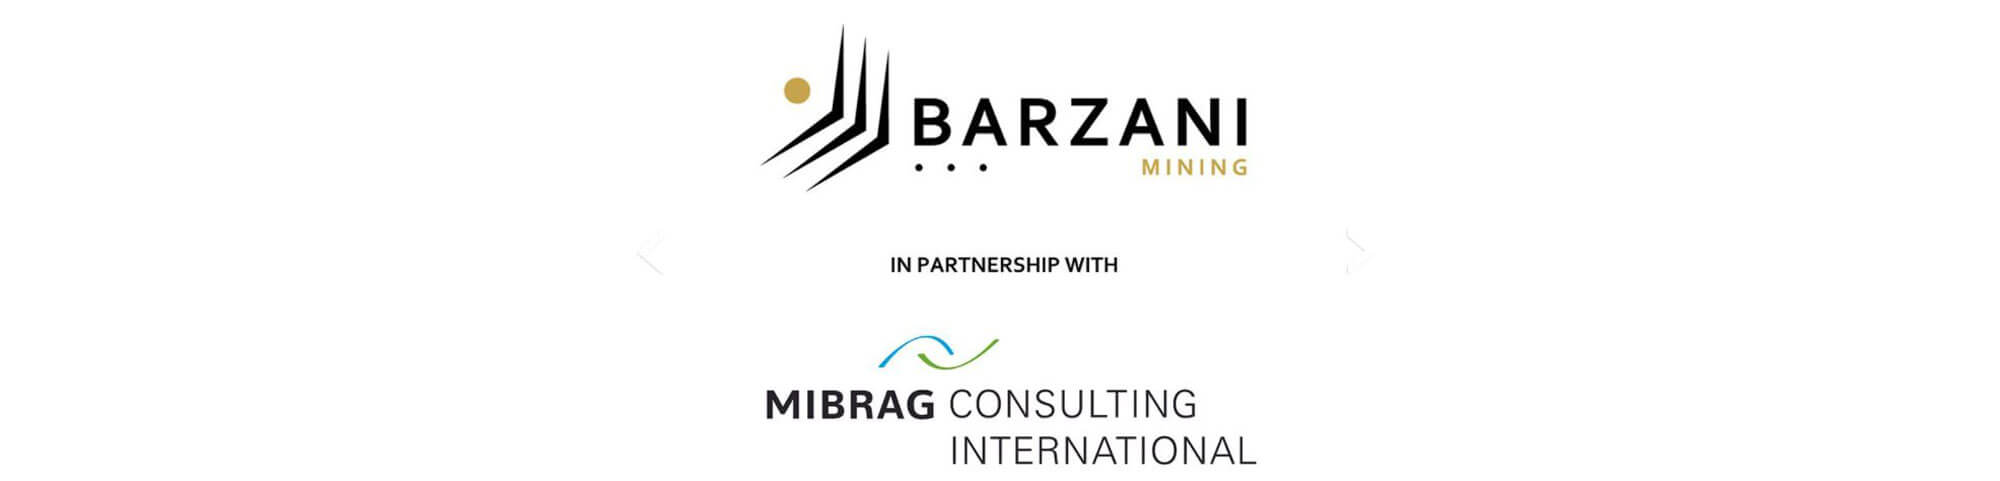 Mibrag Consulting International - Mining Weekly Article about Coal Quality Management